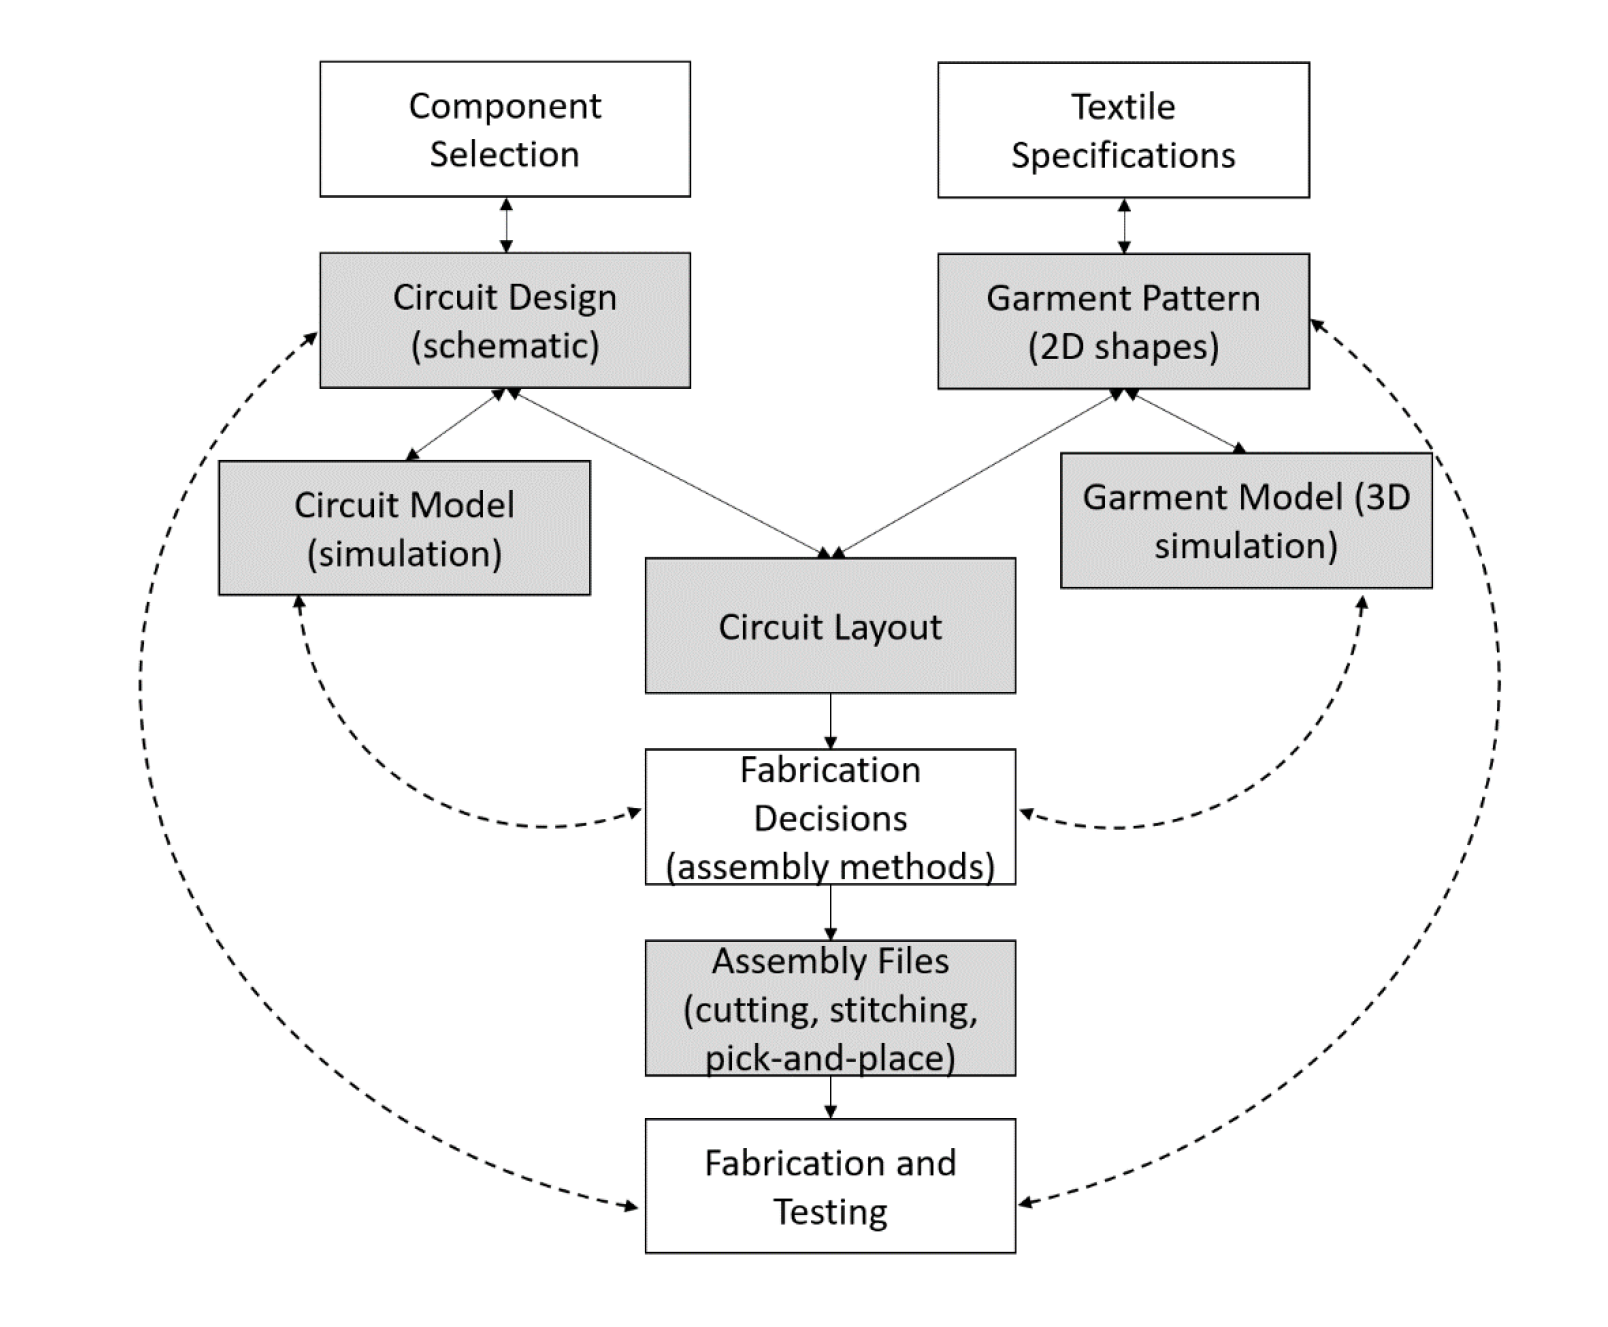 General information framework for design for manufacturability of e-textile products